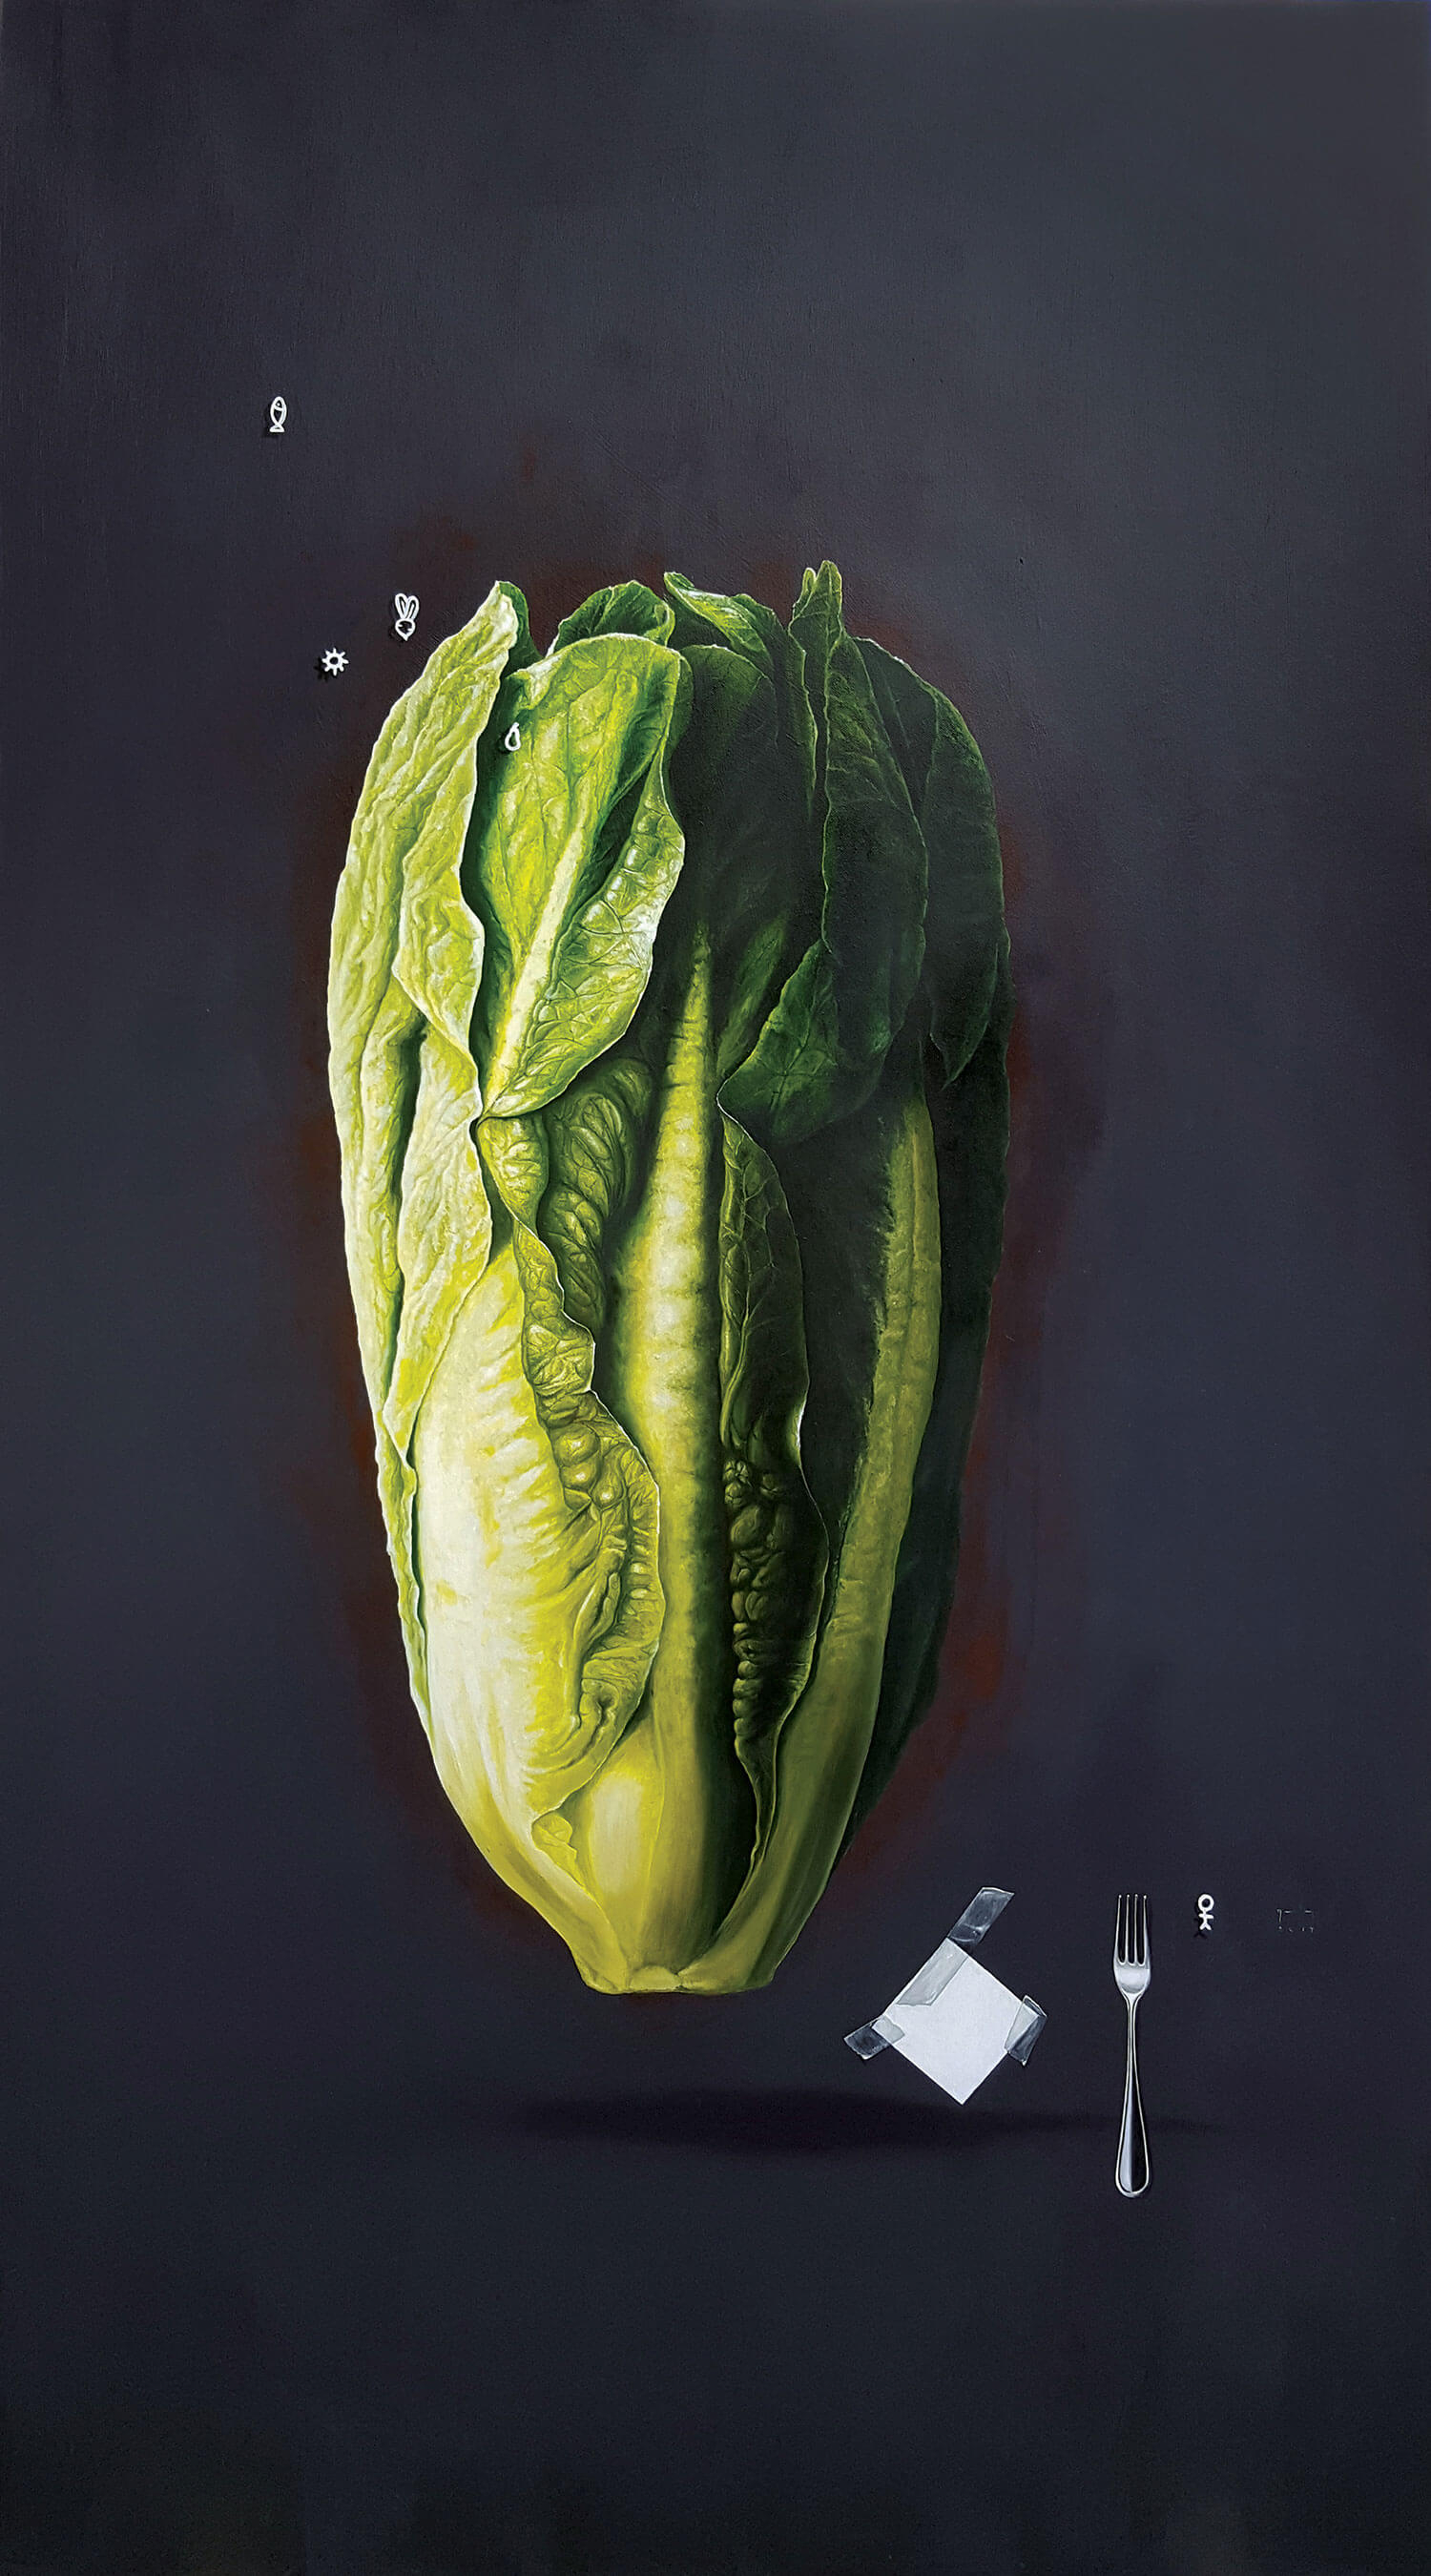 Why do I know that this is a salad | Oil and acrylic on canvas | 100 x 180 cm